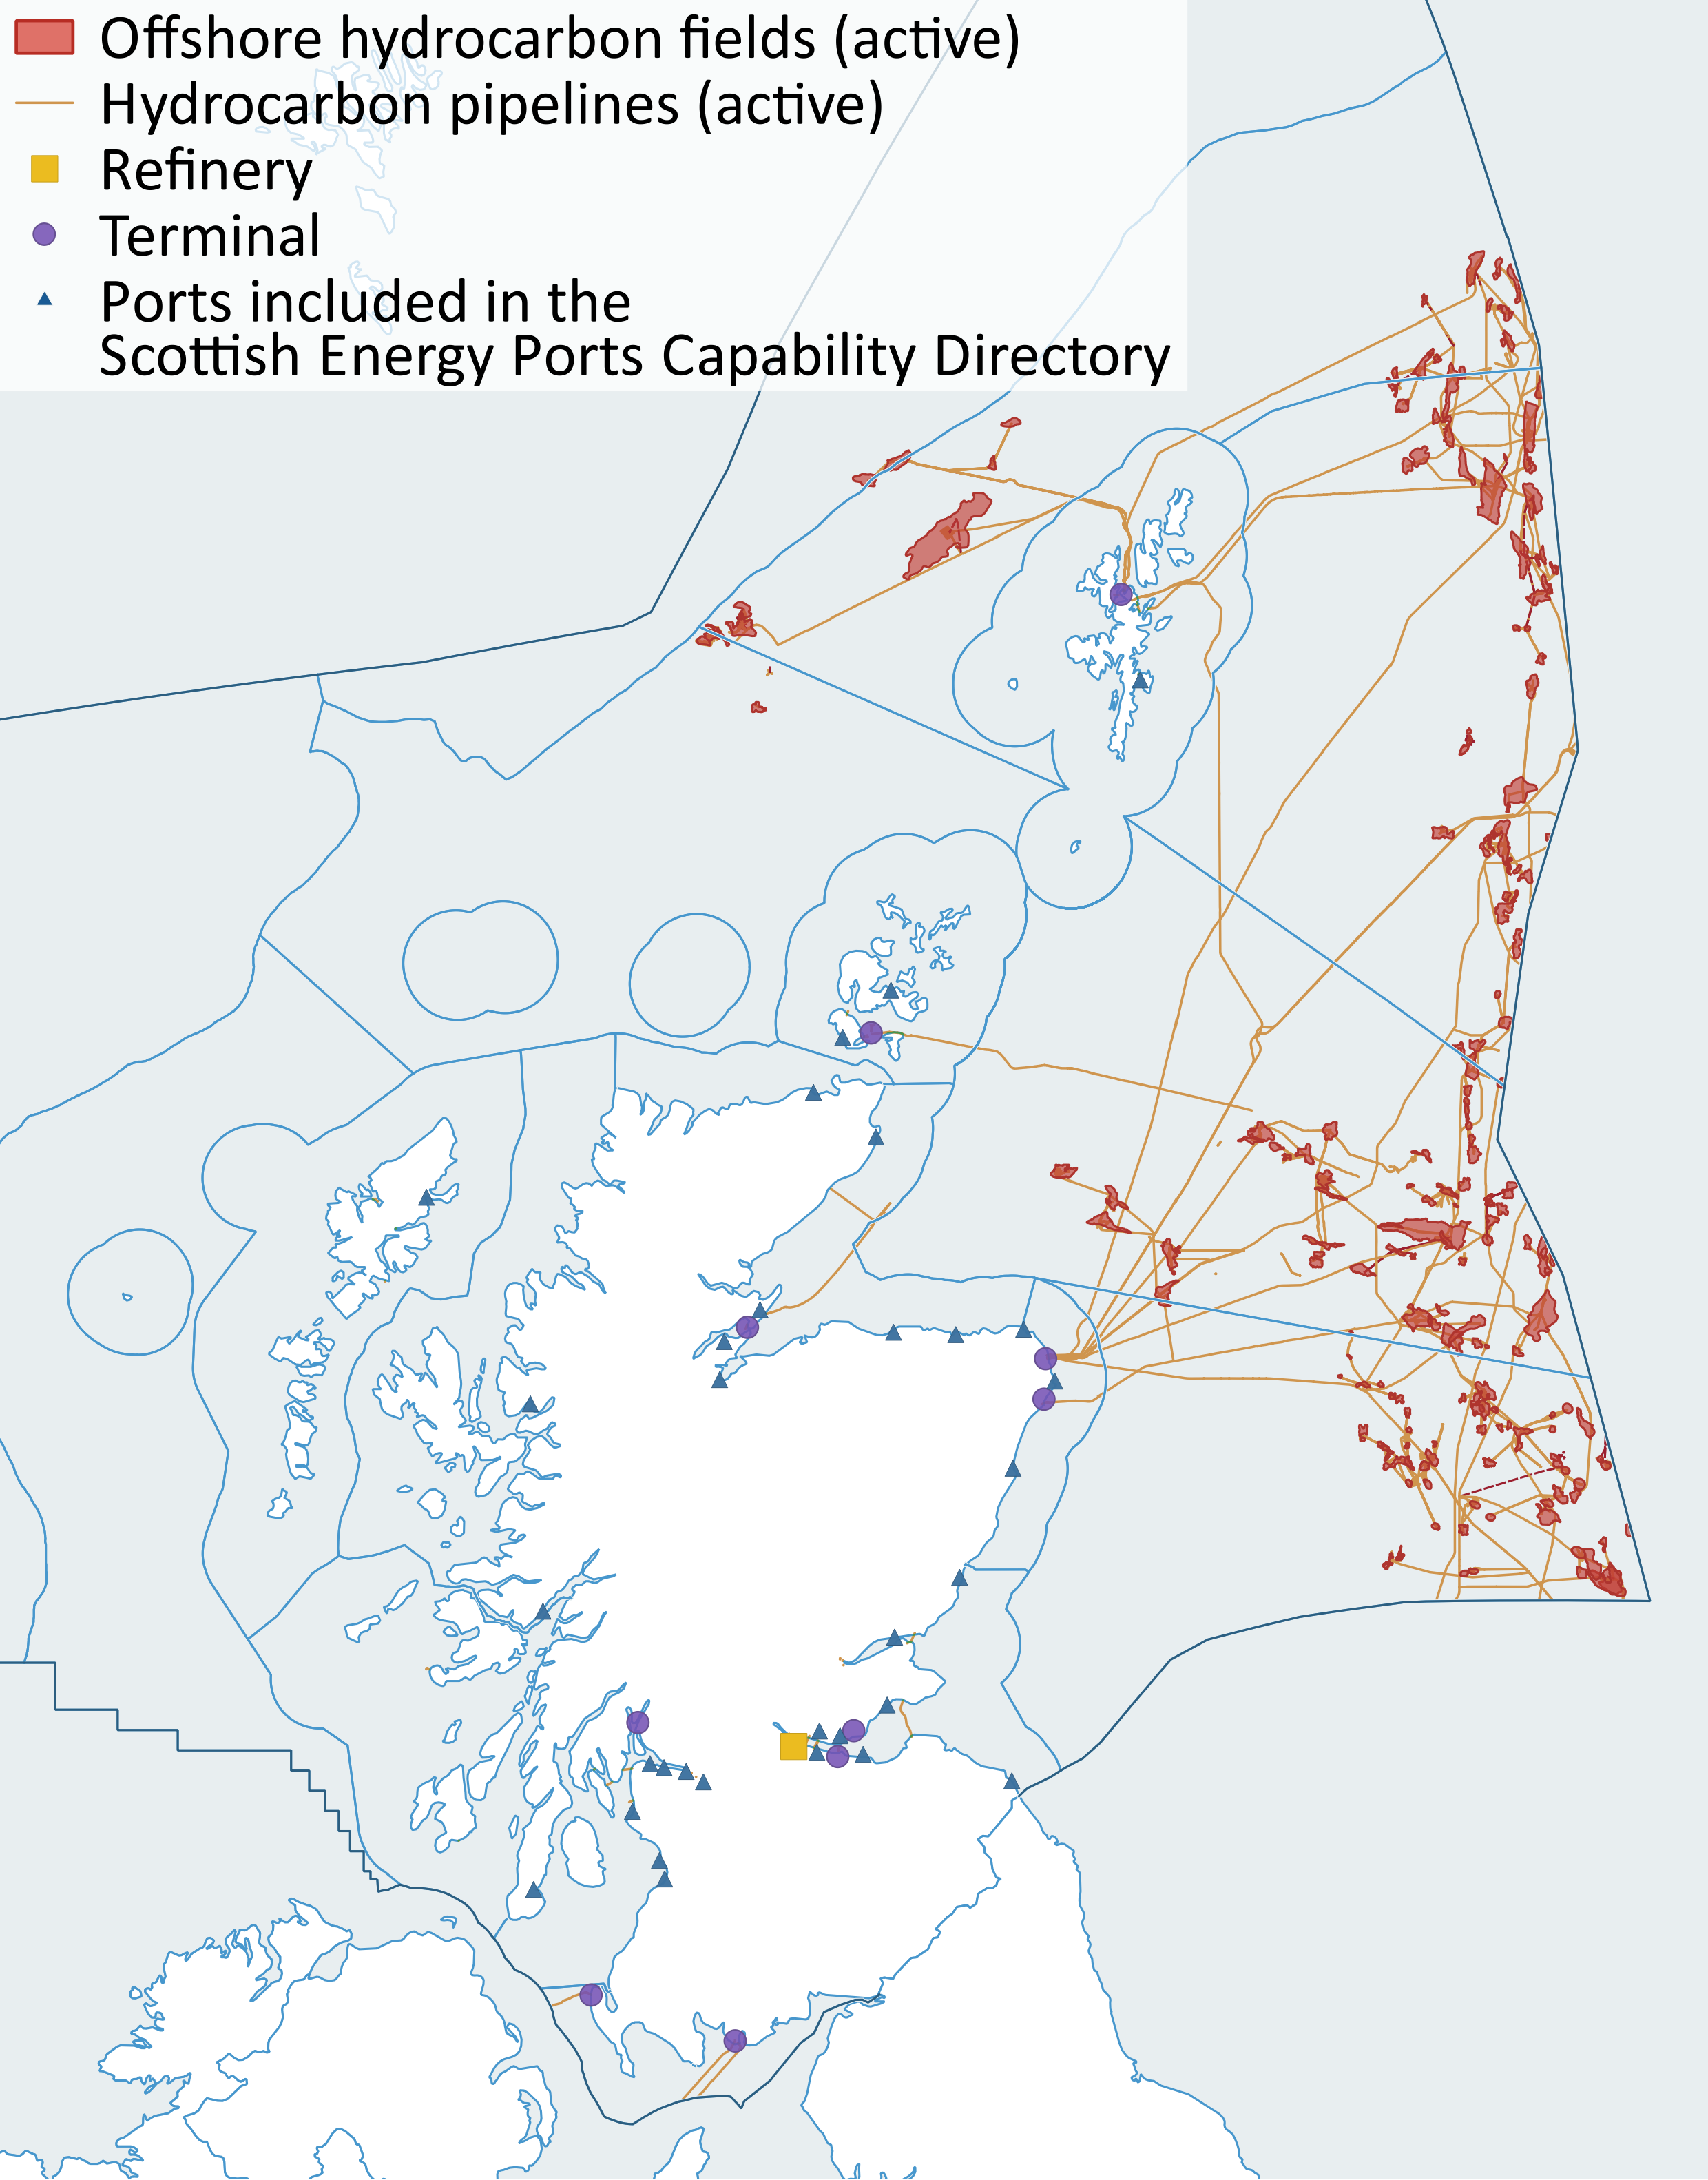 Figure 2: Map of active offshore hydrocarbon fields, pipelines and main coastal infrastructure with Scottish Marine Regions and Offshore Marine Regions. Source: OGA, Ocean Wise and Scottish Energy Ports Capability Directory.